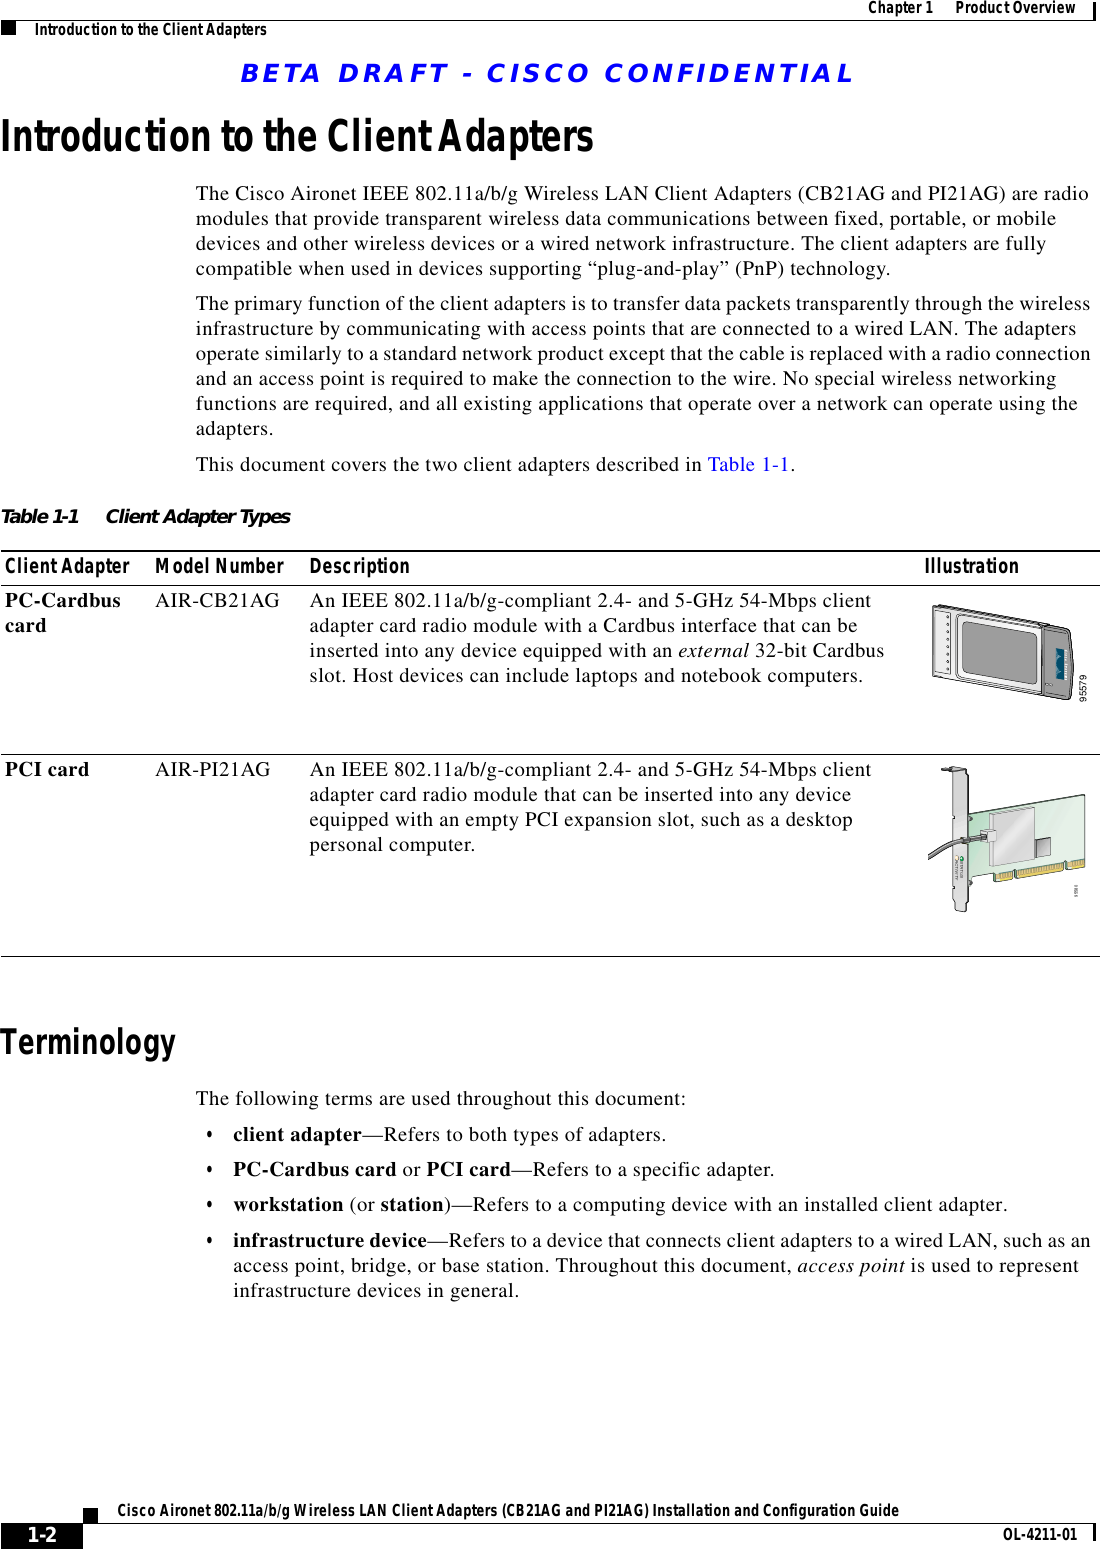 BETA DRAFT - CISCO CONFIDENTIAL1-2Cisco Aironet 802.11a/b/g Wireless LAN Client Adapters (CB21AG and PI21AG) Installation and Configuration Guide OL-4211-01Chapter 1      Product OverviewIntroduction to the Client AdaptersIntroduction to the Client AdaptersThe Cisco Aironet IEEE 802.11a/b/g Wireless LAN Client Adapters (CB21AG and PI21AG) are radio modules that provide transparent wireless data communications between fixed, portable, or mobile devices and other wireless devices or a wired network infrastructure. The client adapters are fully compatible when used in devices supporting “plug-and-play” (PnP) technology.The primary function of the client adapters is to transfer data packets transparently through the wireless infrastructure by communicating with access points that are connected to a wired LAN. The adapters operate similarly to a standard network product except that the cable is replaced with a radio connection and an access point is required to make the connection to the wire. No special wireless networking functions are required, and all existing applications that operate over a network can operate using the adapters.This document covers the two client adapters described in Table 1-1.TerminologyThe following terms are used throughout this document:•client adapter—Refers to both types of adapters.•PC-Cardbus card or PCI card—Refers to a specific adapter.•workstation (or station)—Refers to a computing device with an installed client adapter.•infrastructure device—Refers to a device that connects client adapters to a wired LAN, such as an access point, bridge, or base station. Throughout this document, access point is used to represent infrastructure devices in general.Table 1-1 Client Adapter TypesClient Adapter Model Number Description IllustrationPC-Cardbus card AIR-CB21AG An IEEE 802.11a/b/g-compliant 2.4- and 5-GHz 54-Mbps client adapter card radio module with a Cardbus interface that can be inserted into any device equipped with an external 32-bit Cardbus slot. Host devices can include laptops and notebook computers.PCI card AIR-PI21AG An IEEE 802.11a/b/g-compliant 2.4- and 5-GHz 54-Mbps client adapter card radio module that can be inserted into any device equipped with an empty PCI expansion slot, such as a desktop personal computer.9557995580STATUSACTIVITY